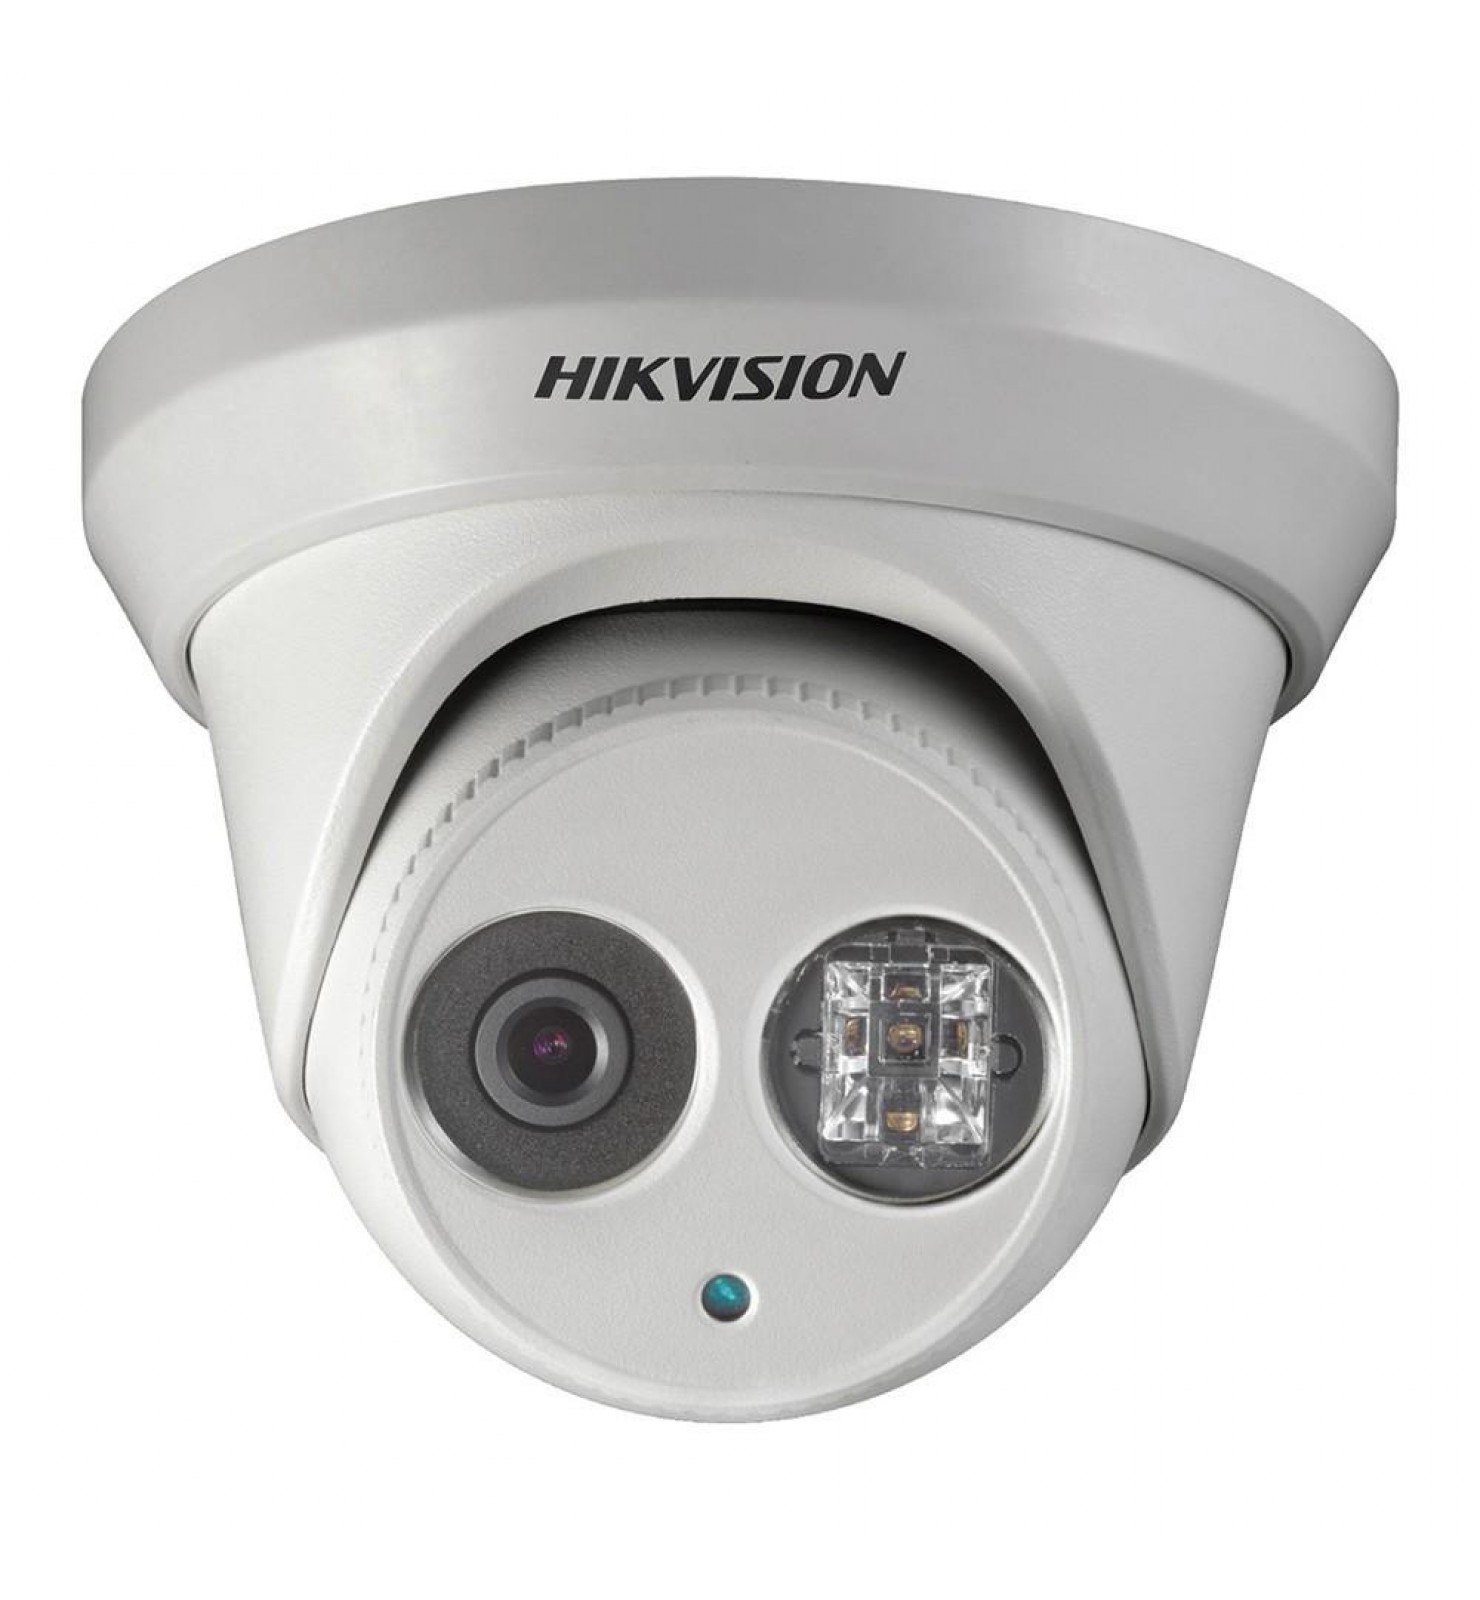 Камера Hikvision DS-2CD2342WD-I